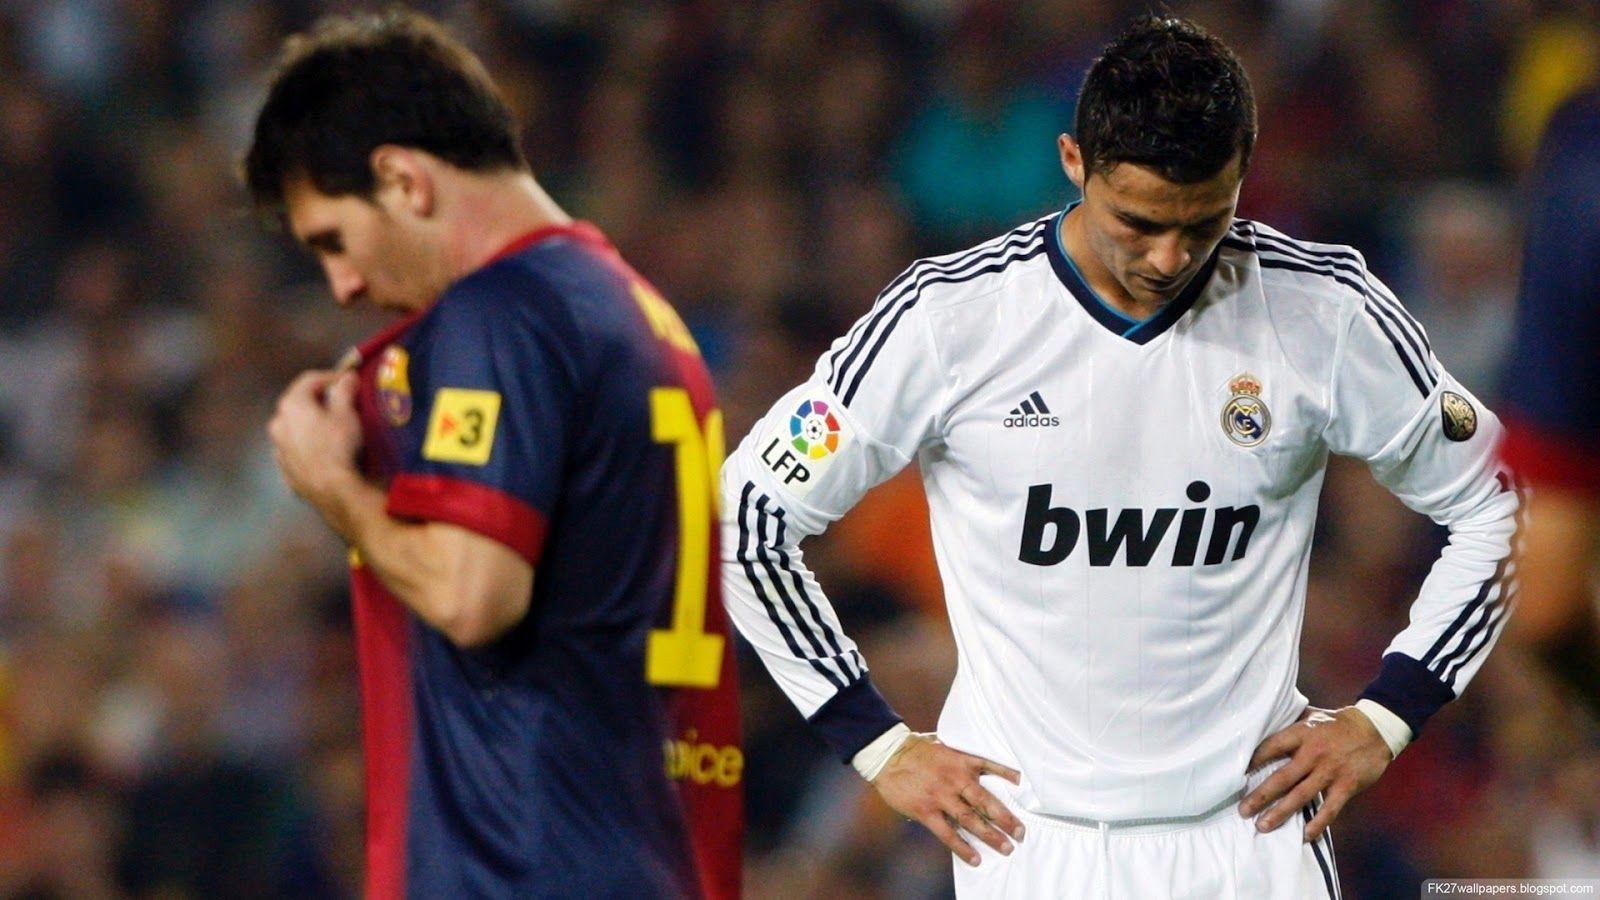 Real Madrid will play Barcelona in a November El Clasico